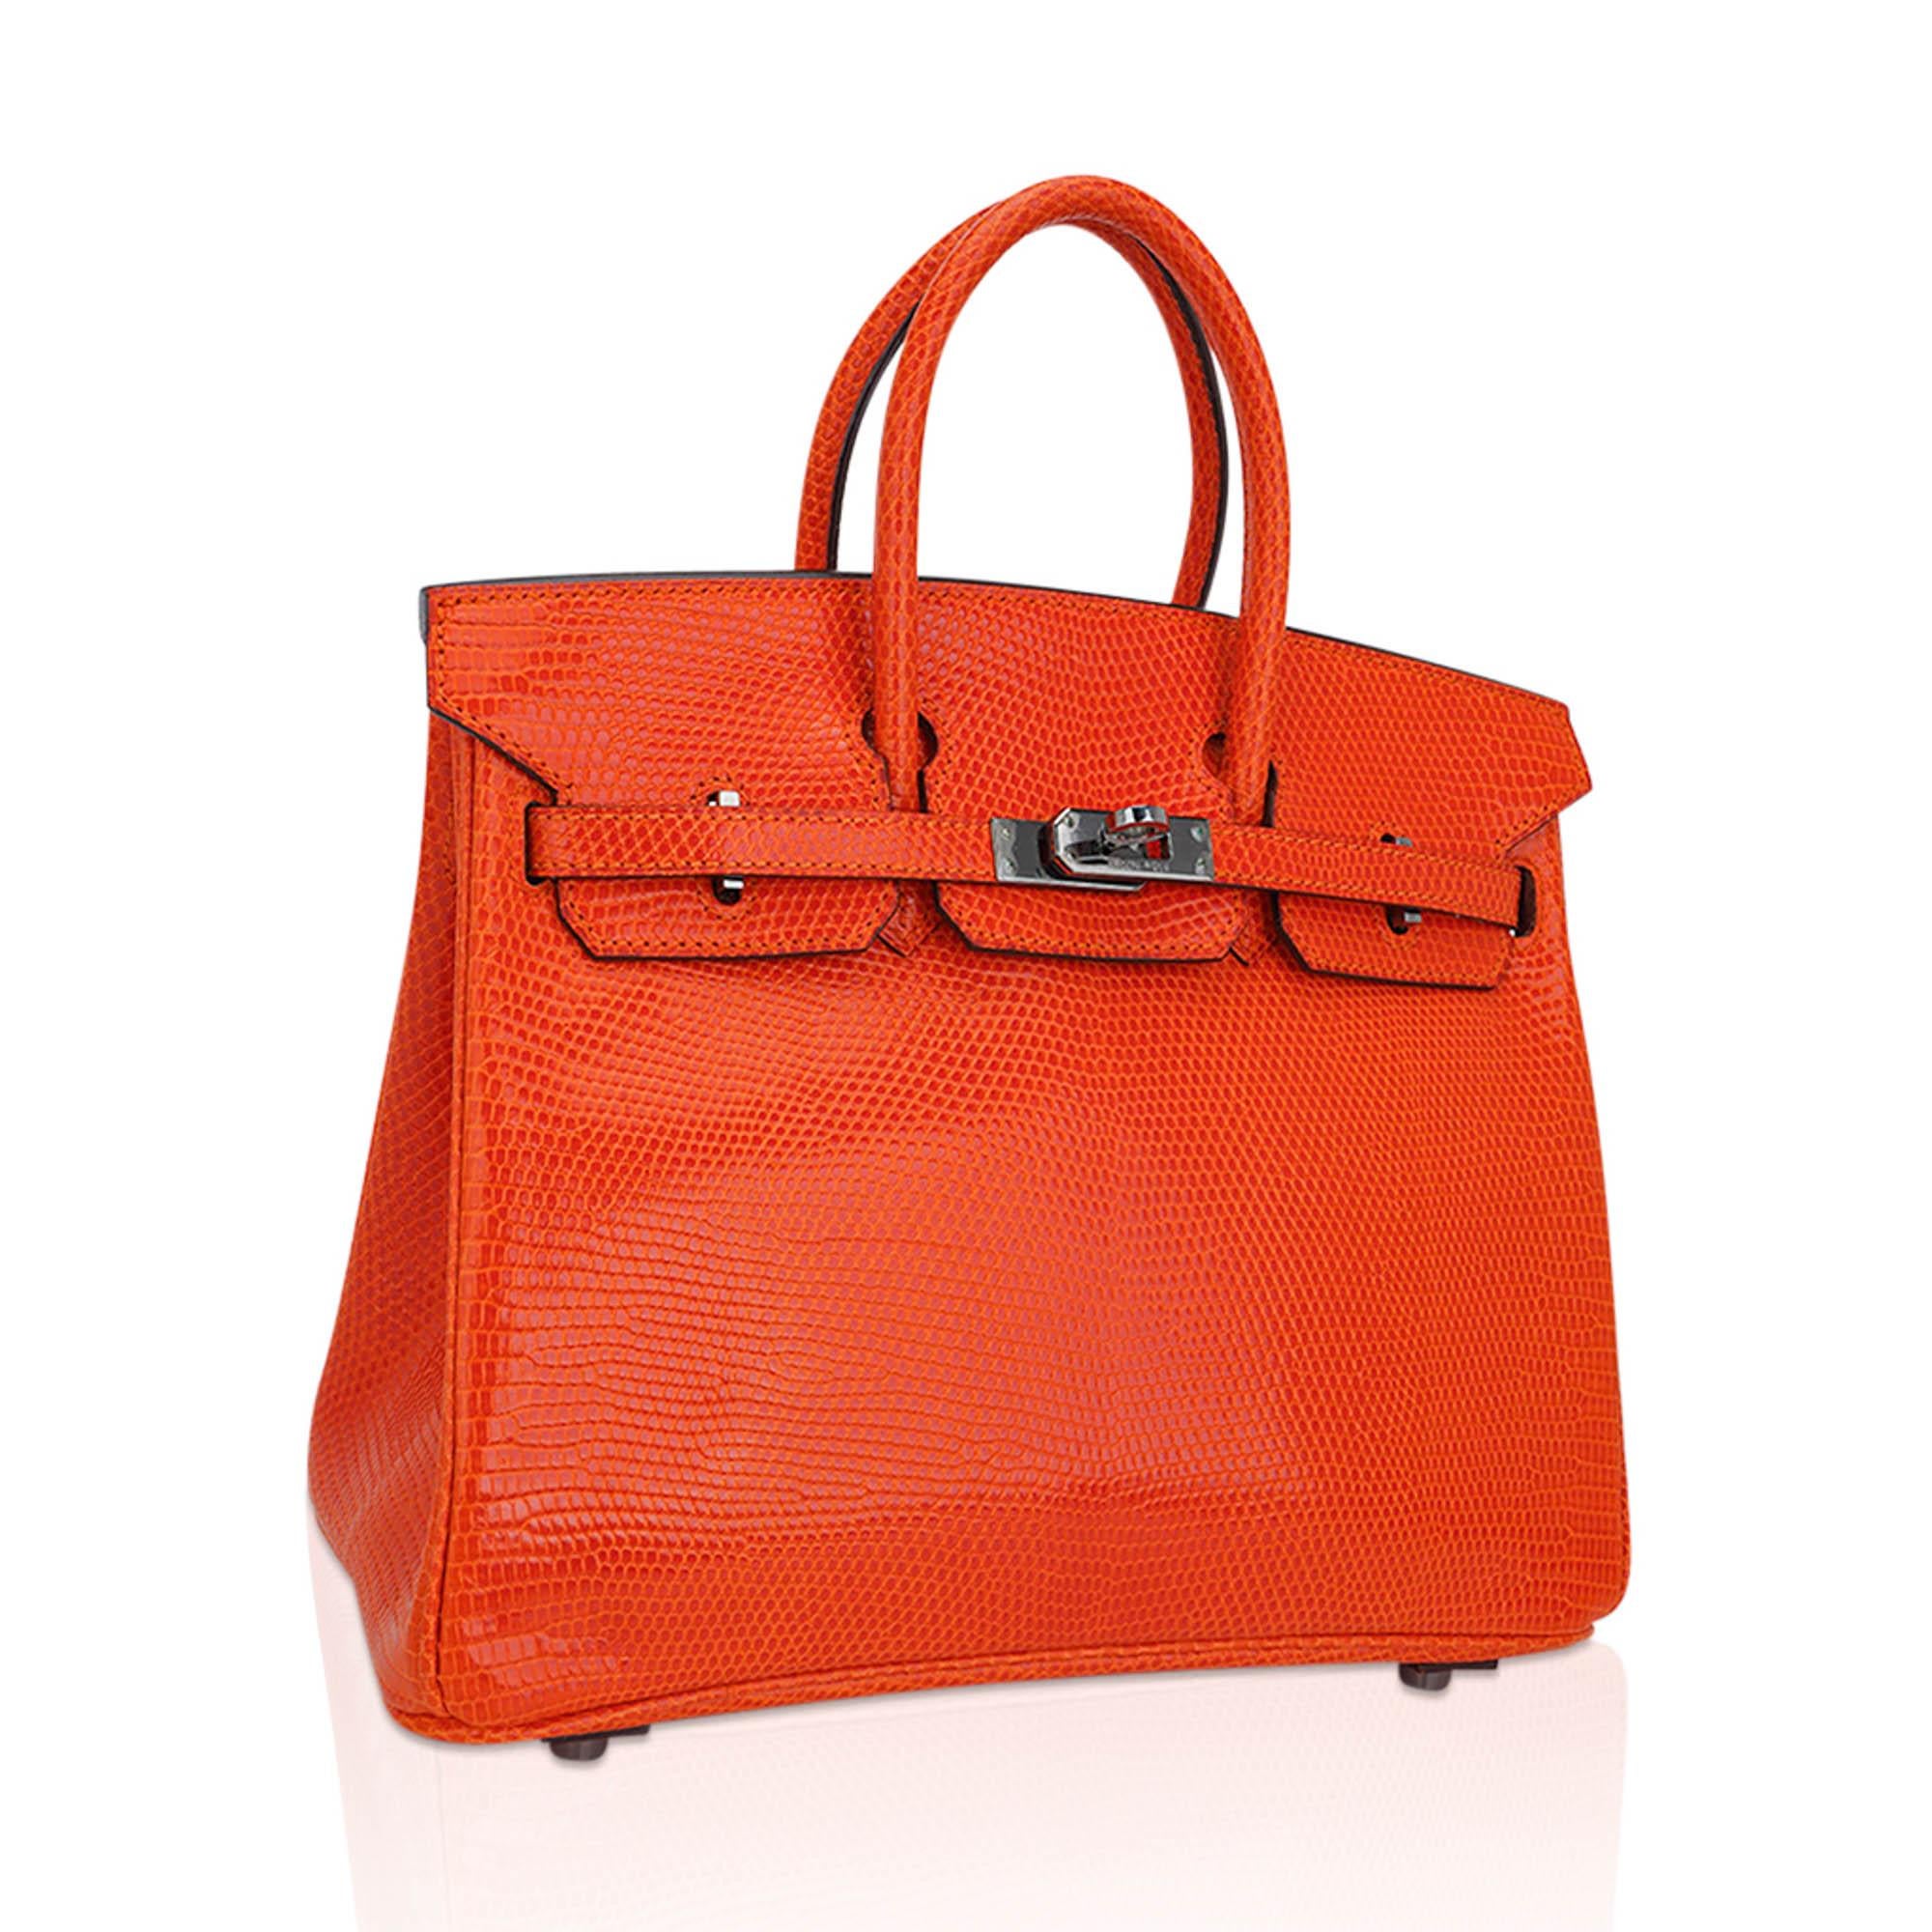 Mightychic offers an Hermes Birkin 25 limited edition vintage bag featured in Tangerine.
Stunning quench of Orange in coveted Lizard with rare Ruthenium hardware.
This beautiful exotic lizard skin Hermes Birkin bag is a collectors treasure.
Comes